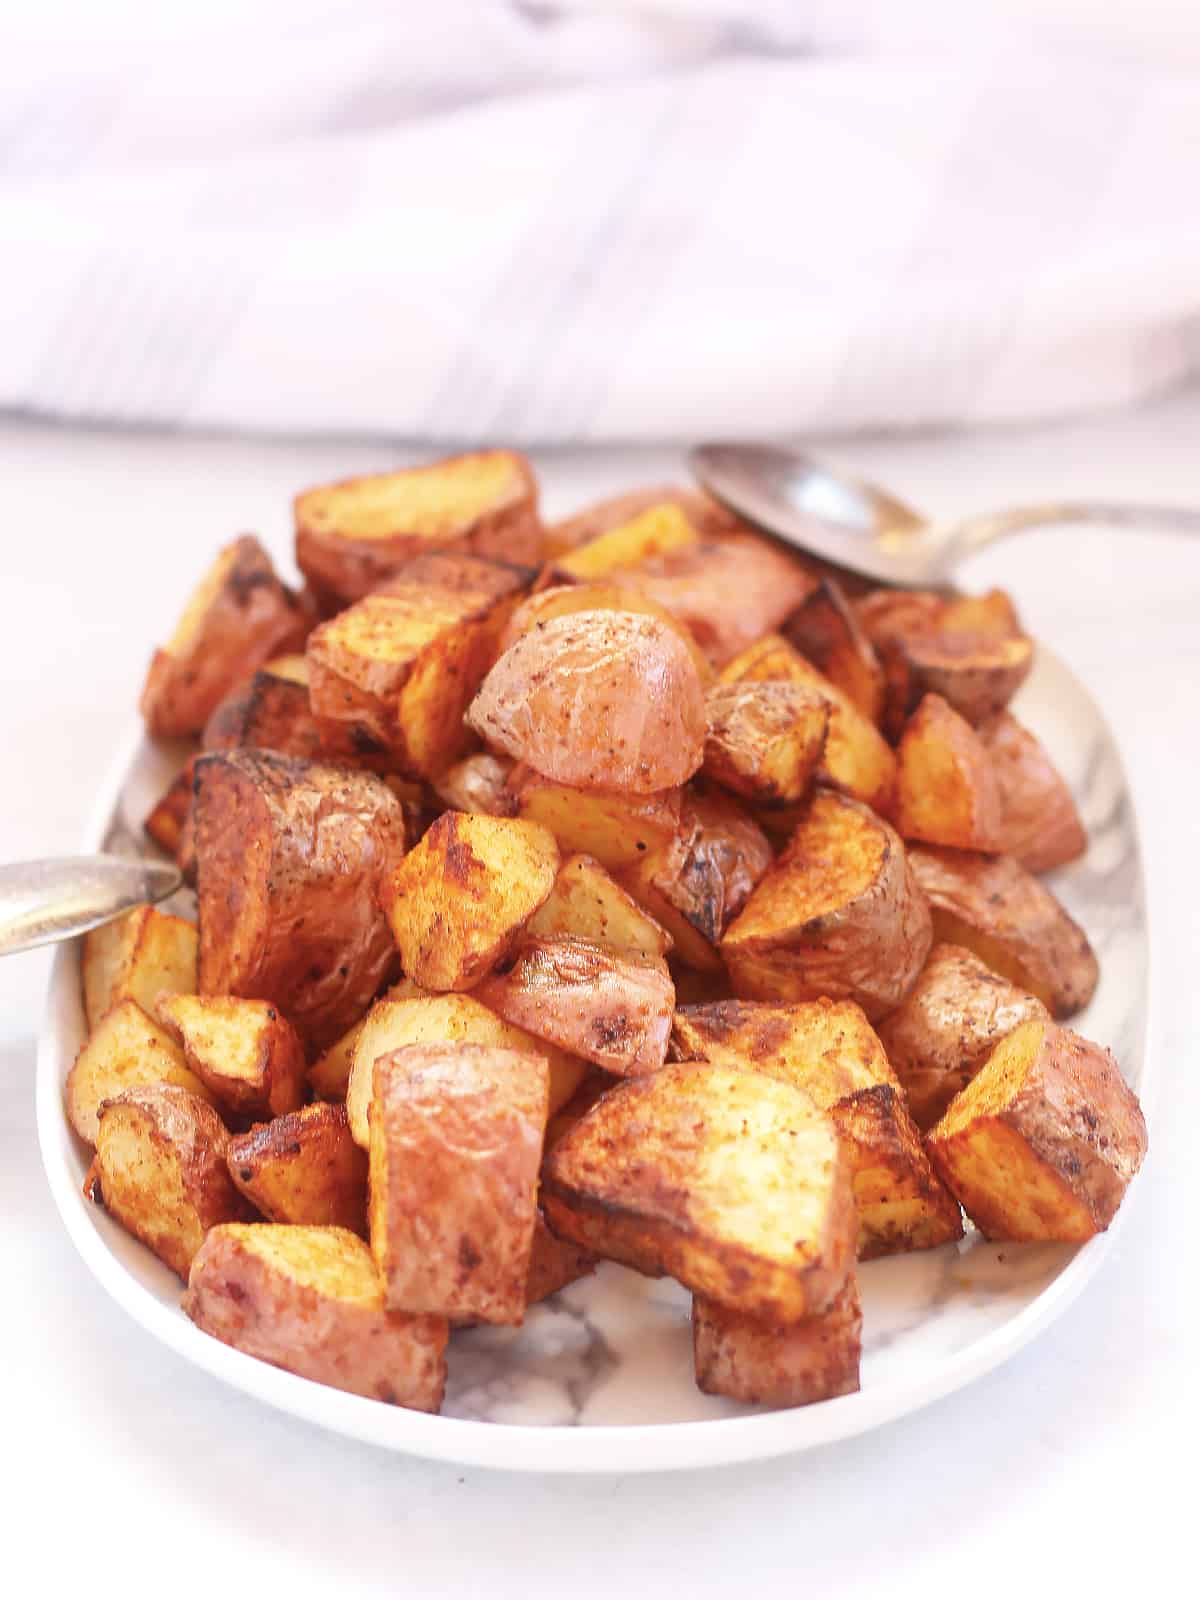 Roasted potatoes with skins on.